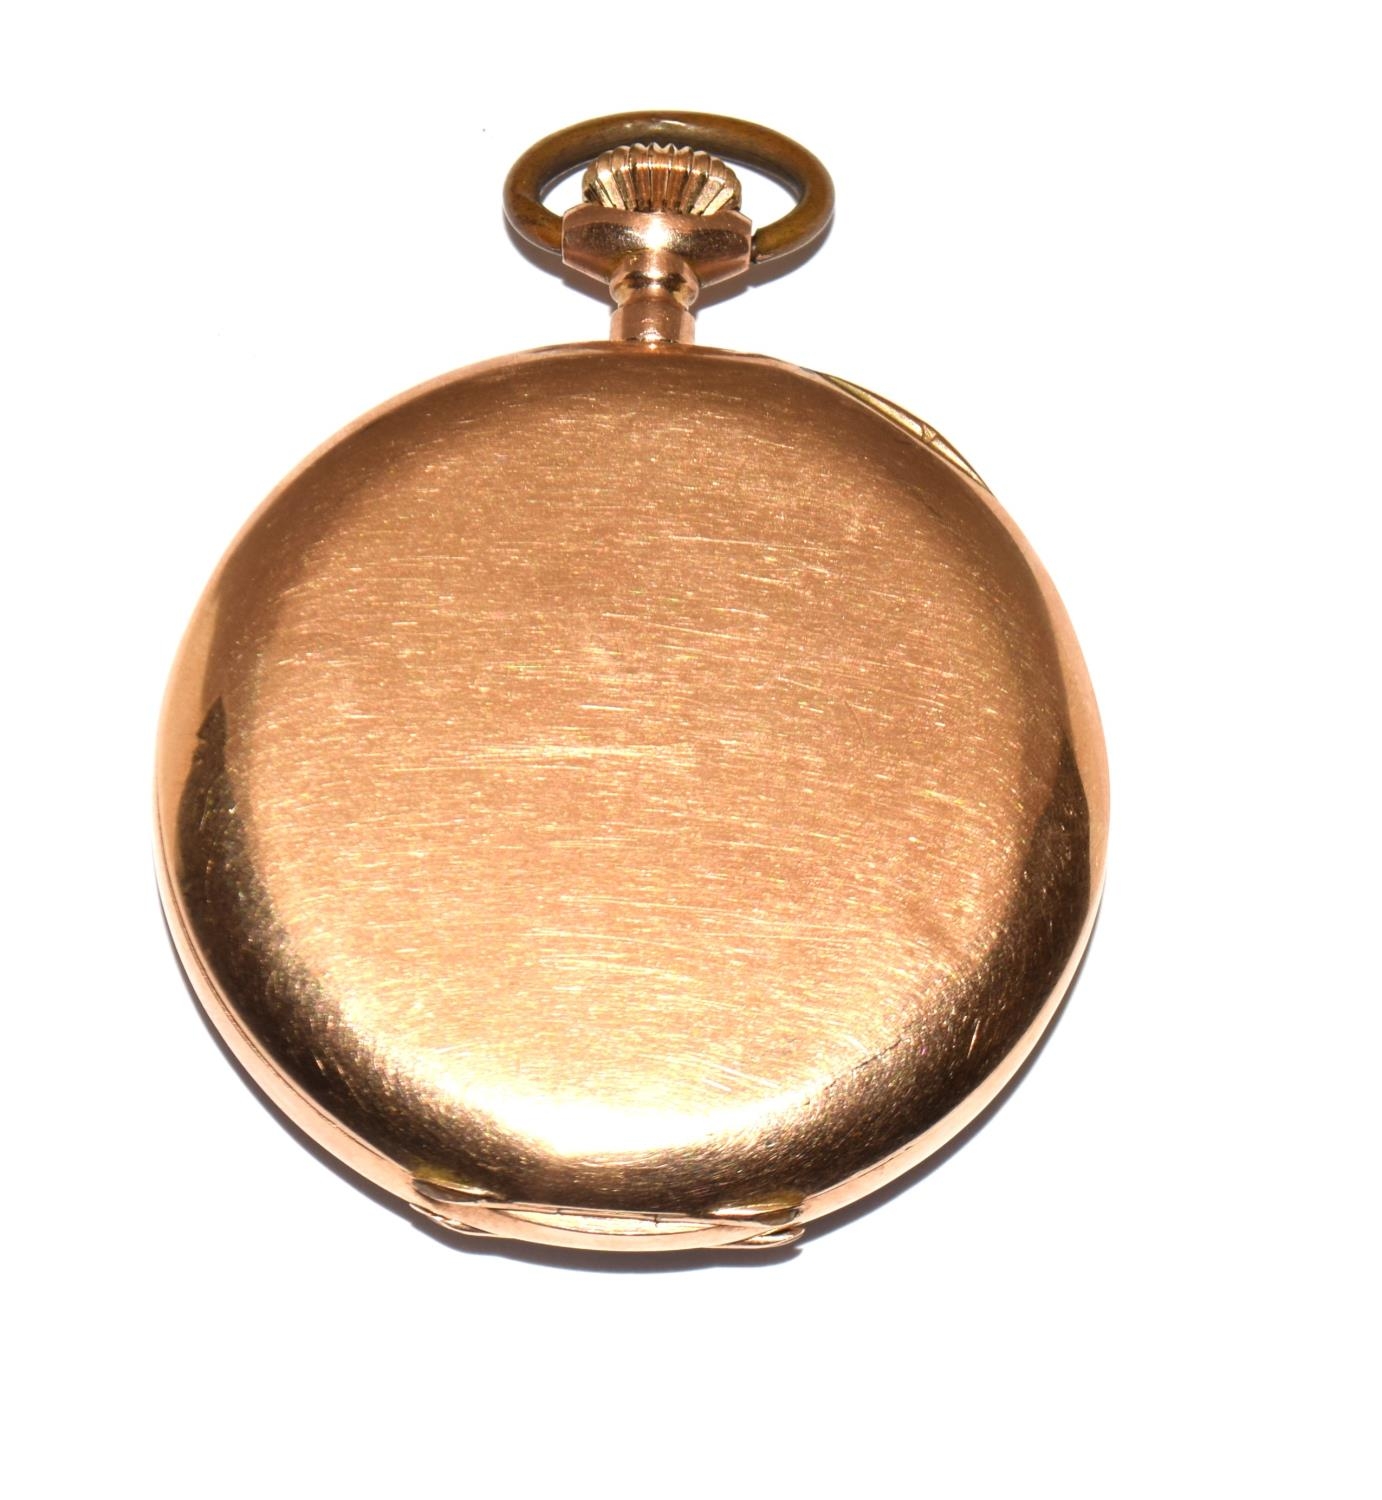 14ct gold open face pocket watch with subsidiary dial working when catalogued 63g - Image 2 of 7